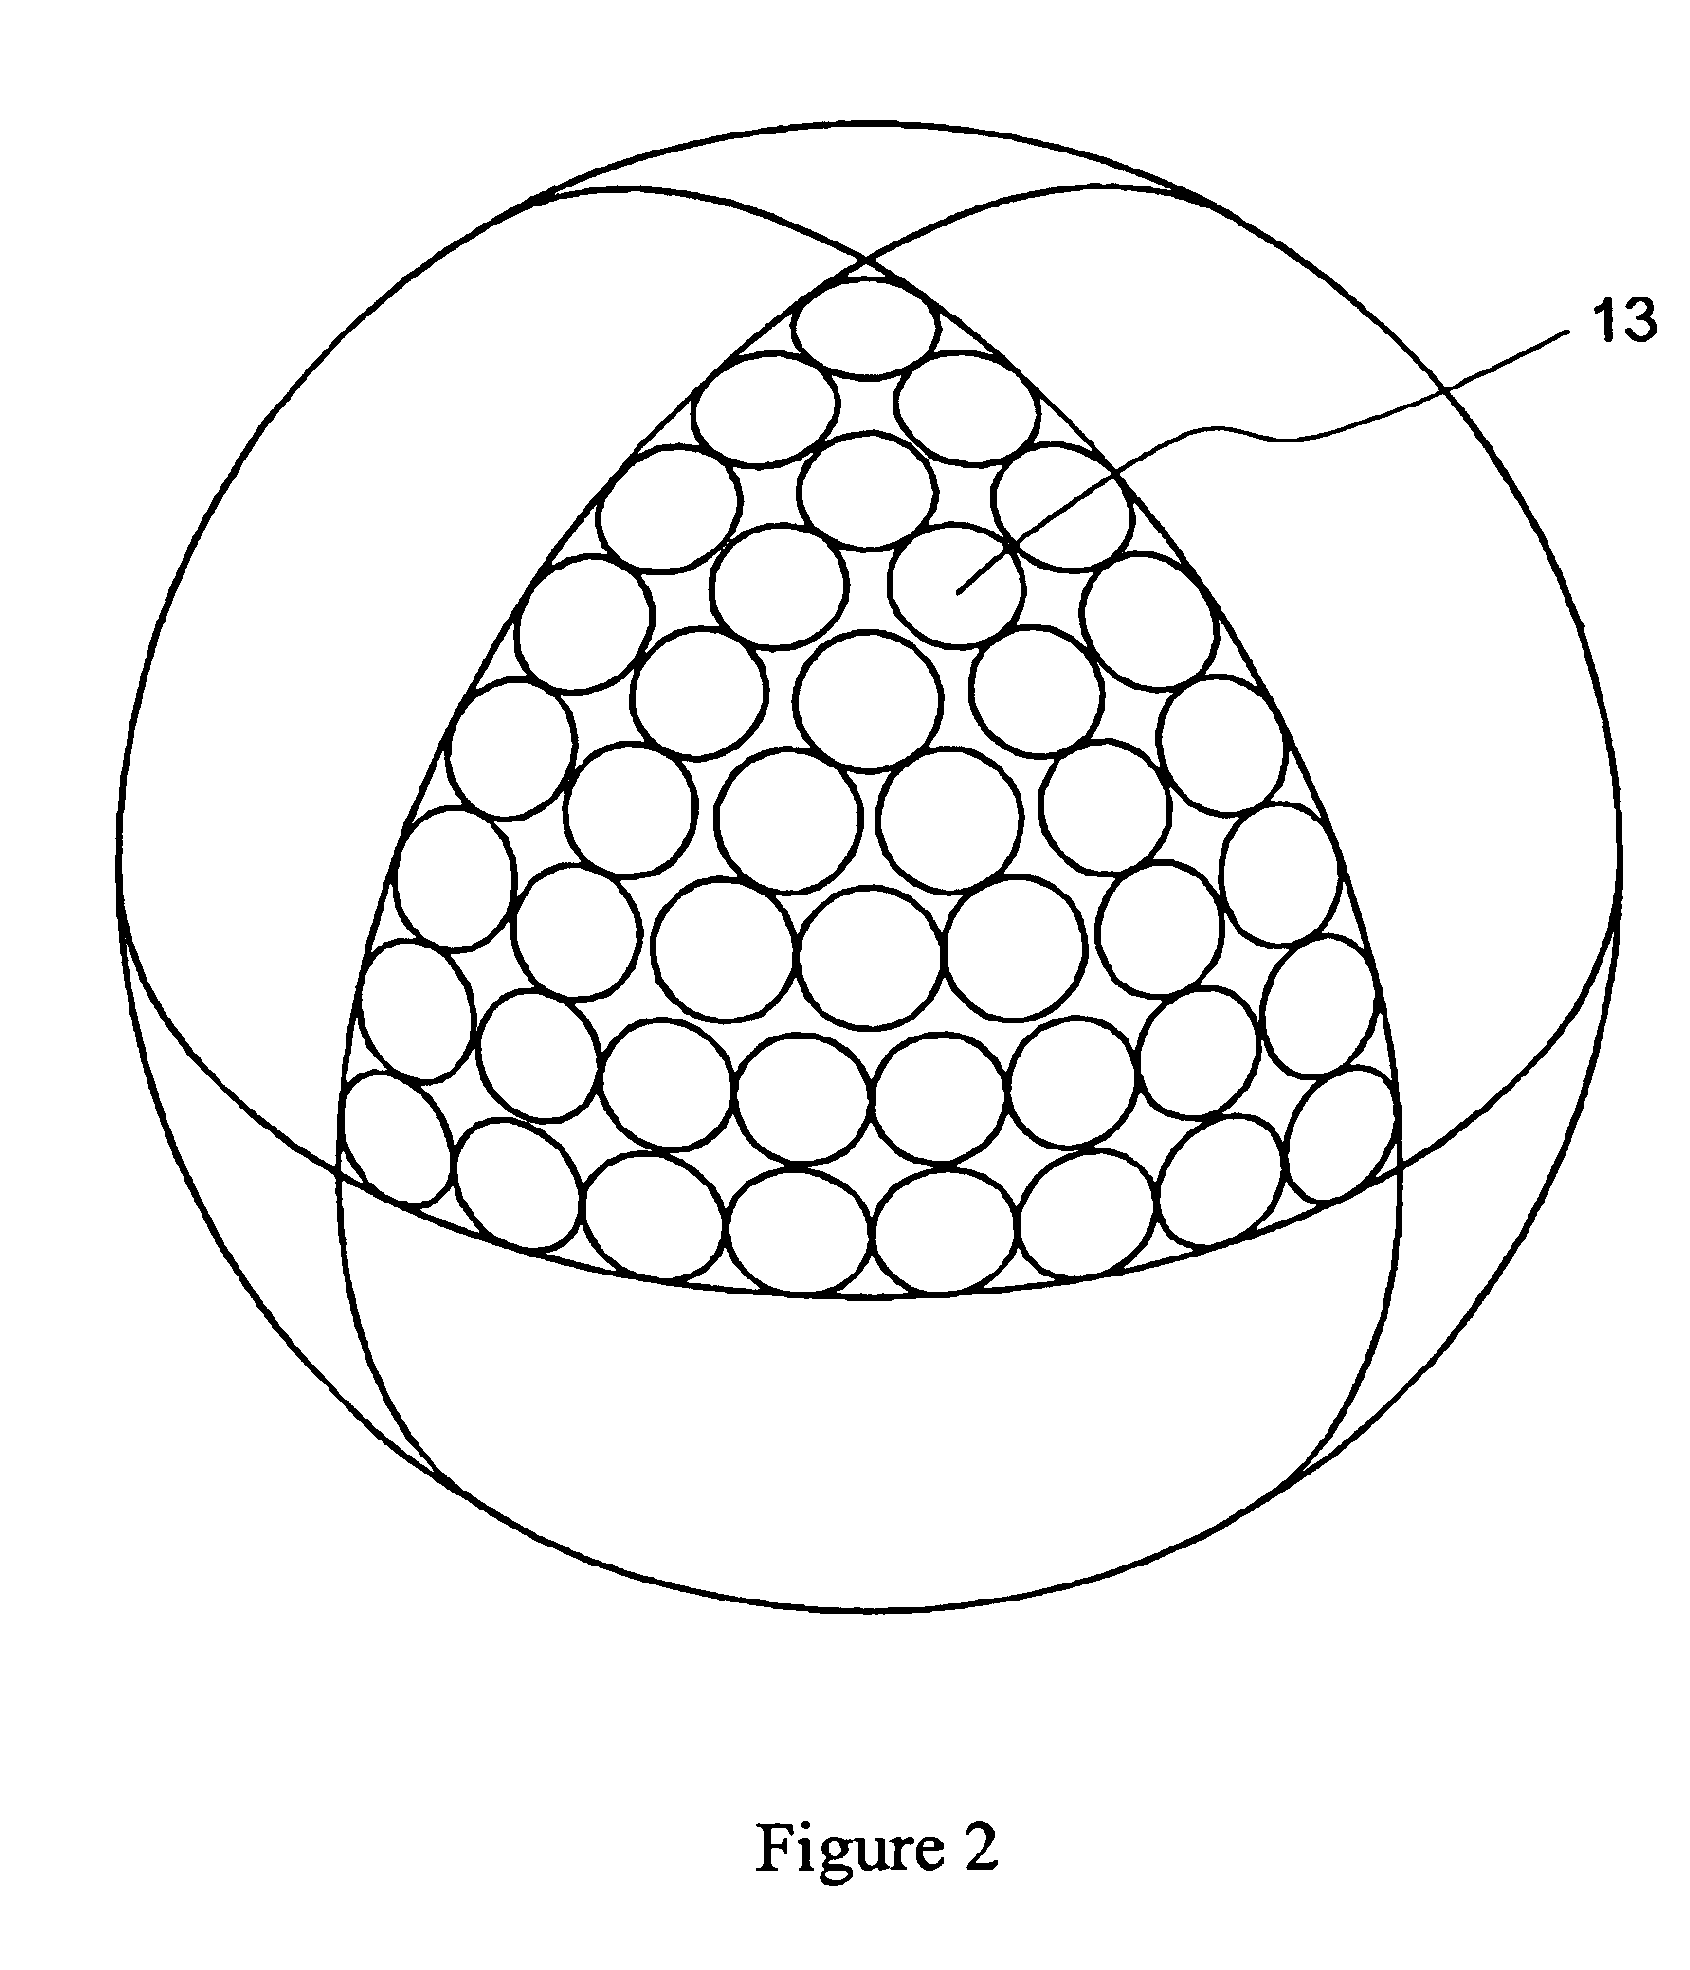 Dimple pattern for golf balls